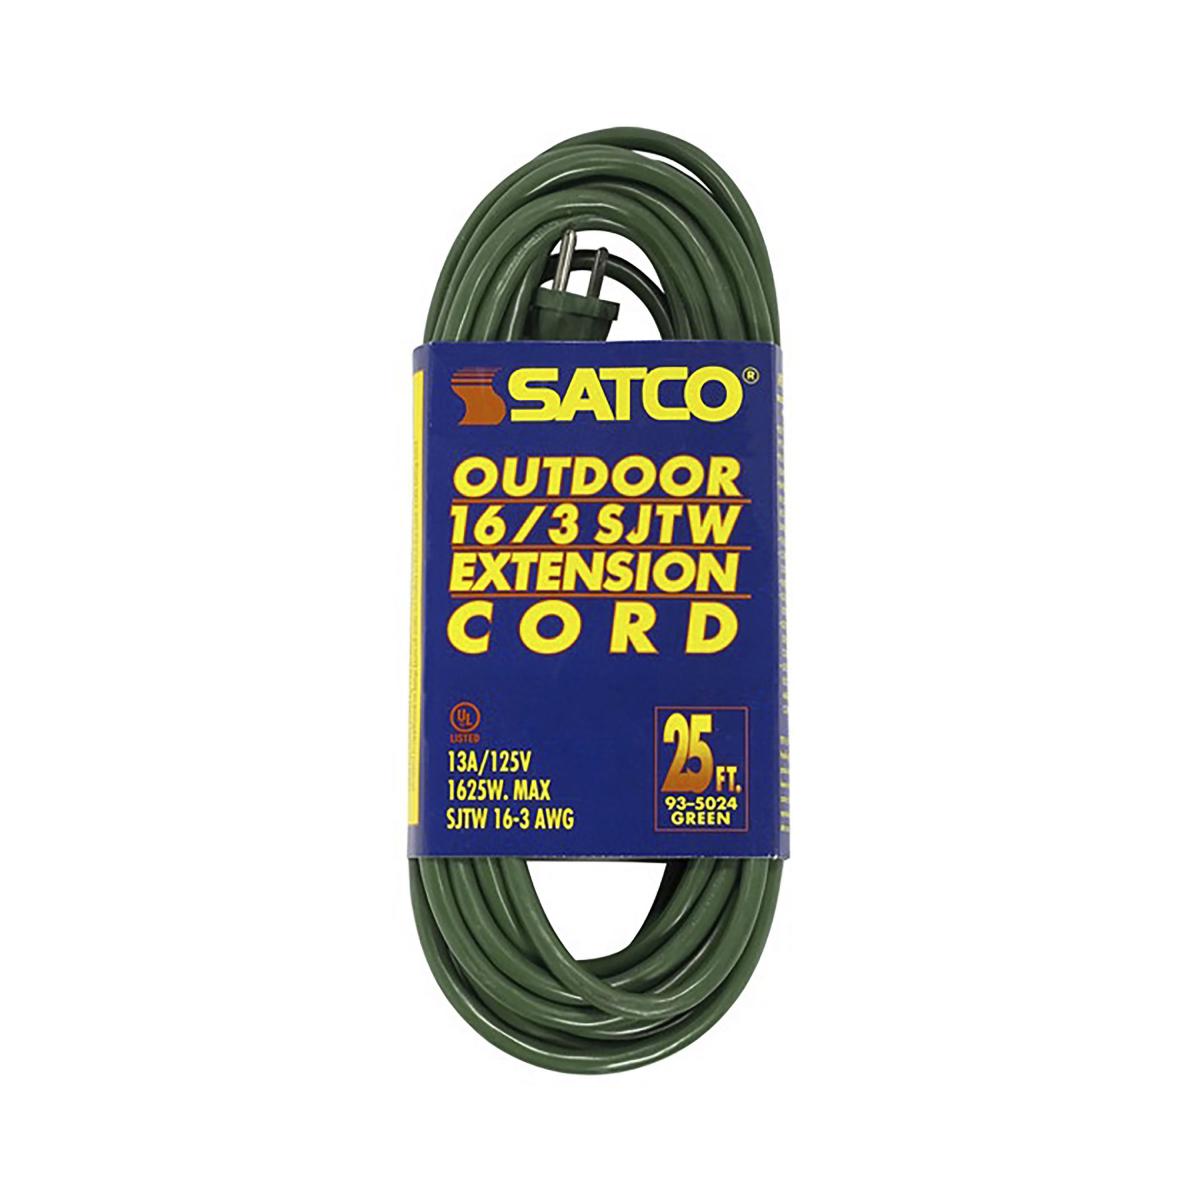 Satco 93-5024 25 Foot Green Heavy Duty Outdoor Extension Cord 16/3 Ga. SJTW-3 Green Cord With Sleeve 13A-125V 1625W